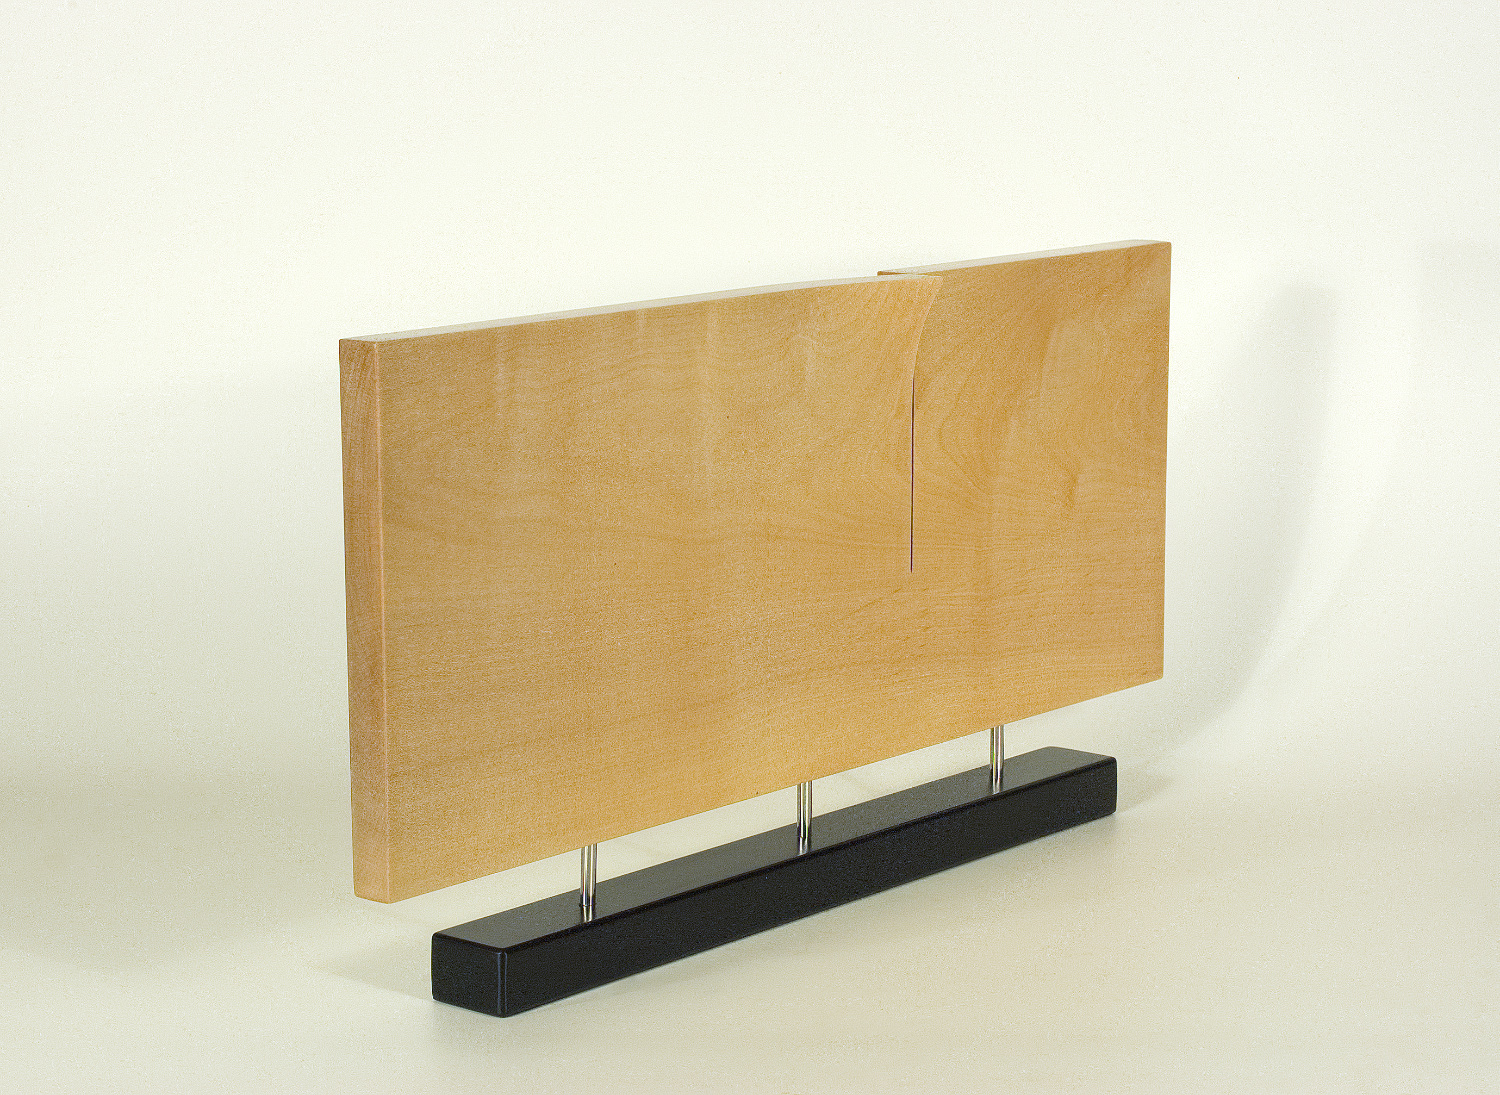 Modern sculpture in wood. Original in sycamore and stainless steel. 